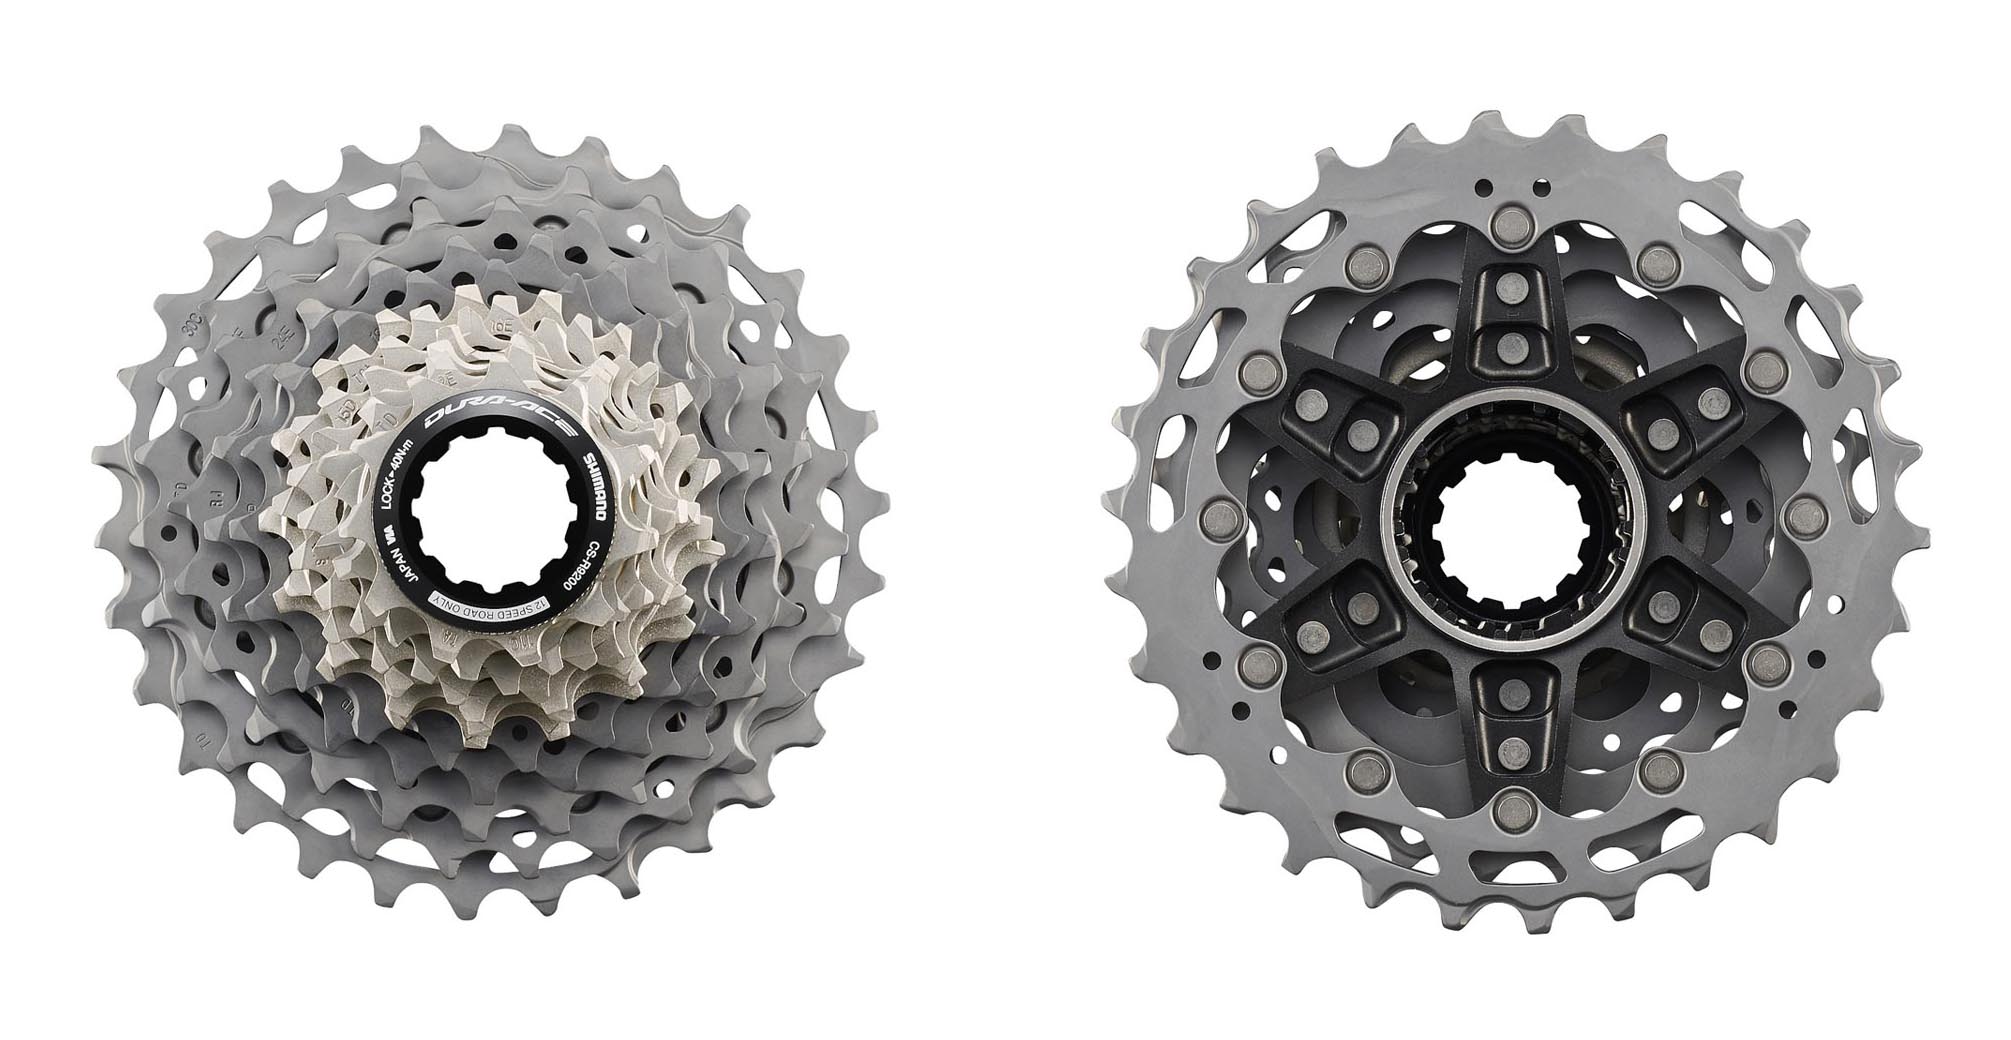 Shimano Dura-Ace AND Ultegra Deliver Fastest Shifting ever with